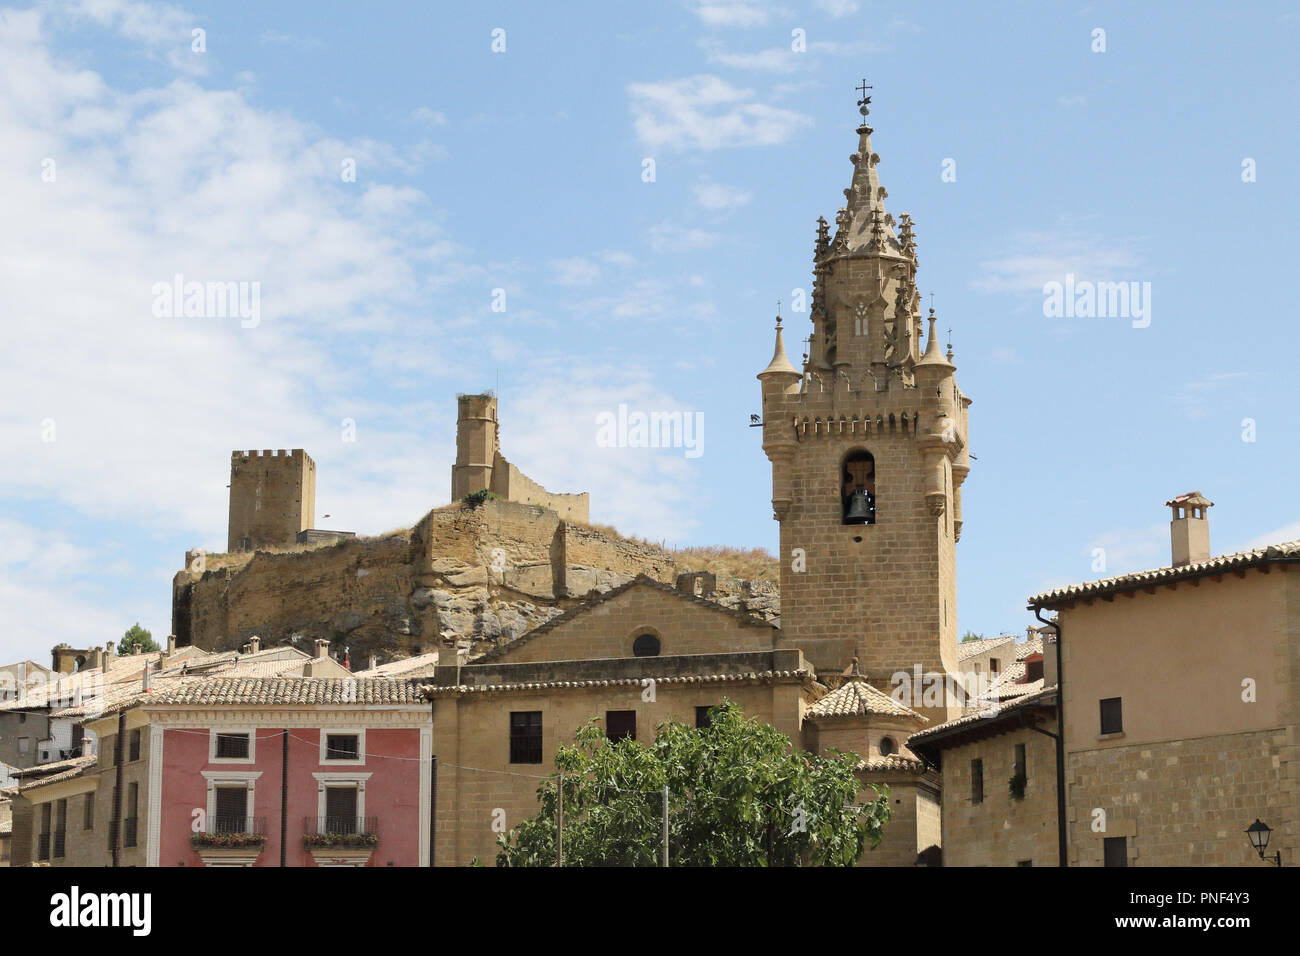 The brick made Holy Mary Church (Iglesia de Santa Maria) with its bell tower and the old rumbled castle of Uncastillo, a rural town in Spain Stock Photo